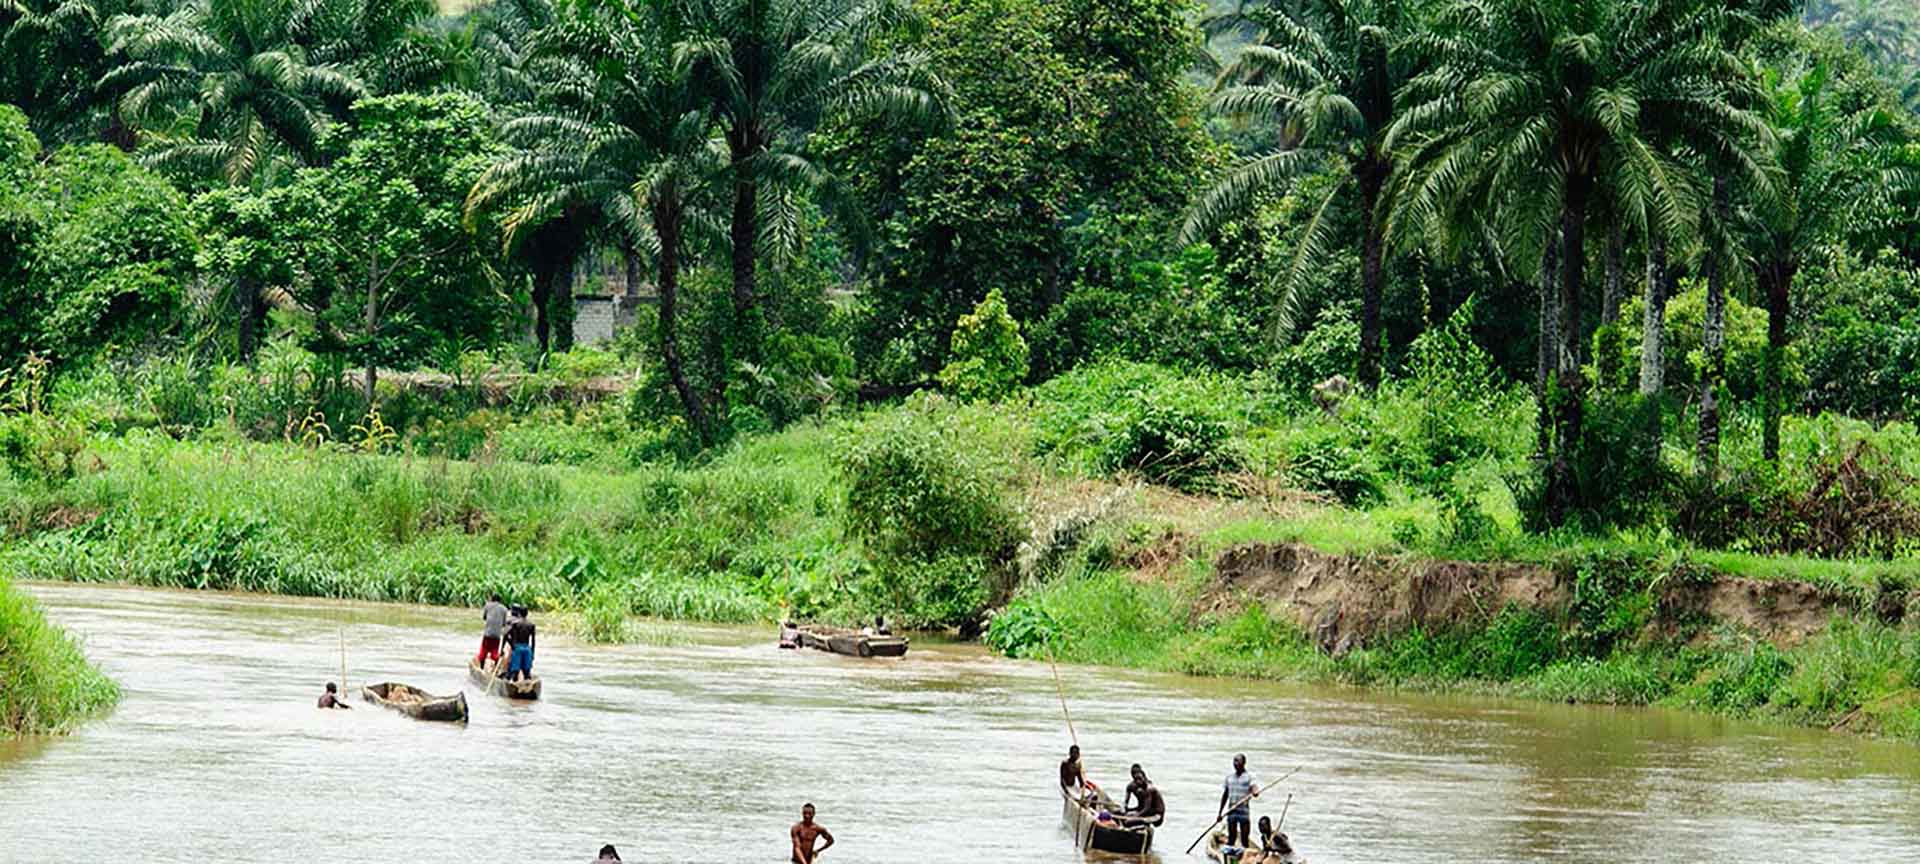 River with men in boats in the Democratic Republic of Congo